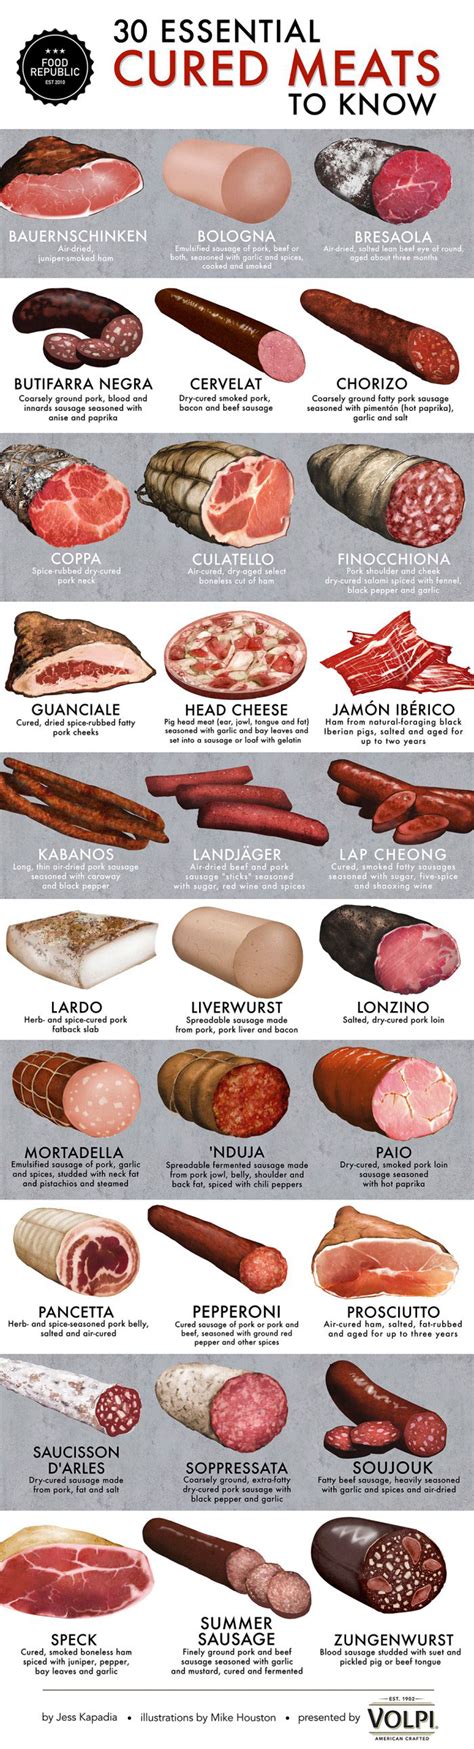 cured meats   infographic  infographics